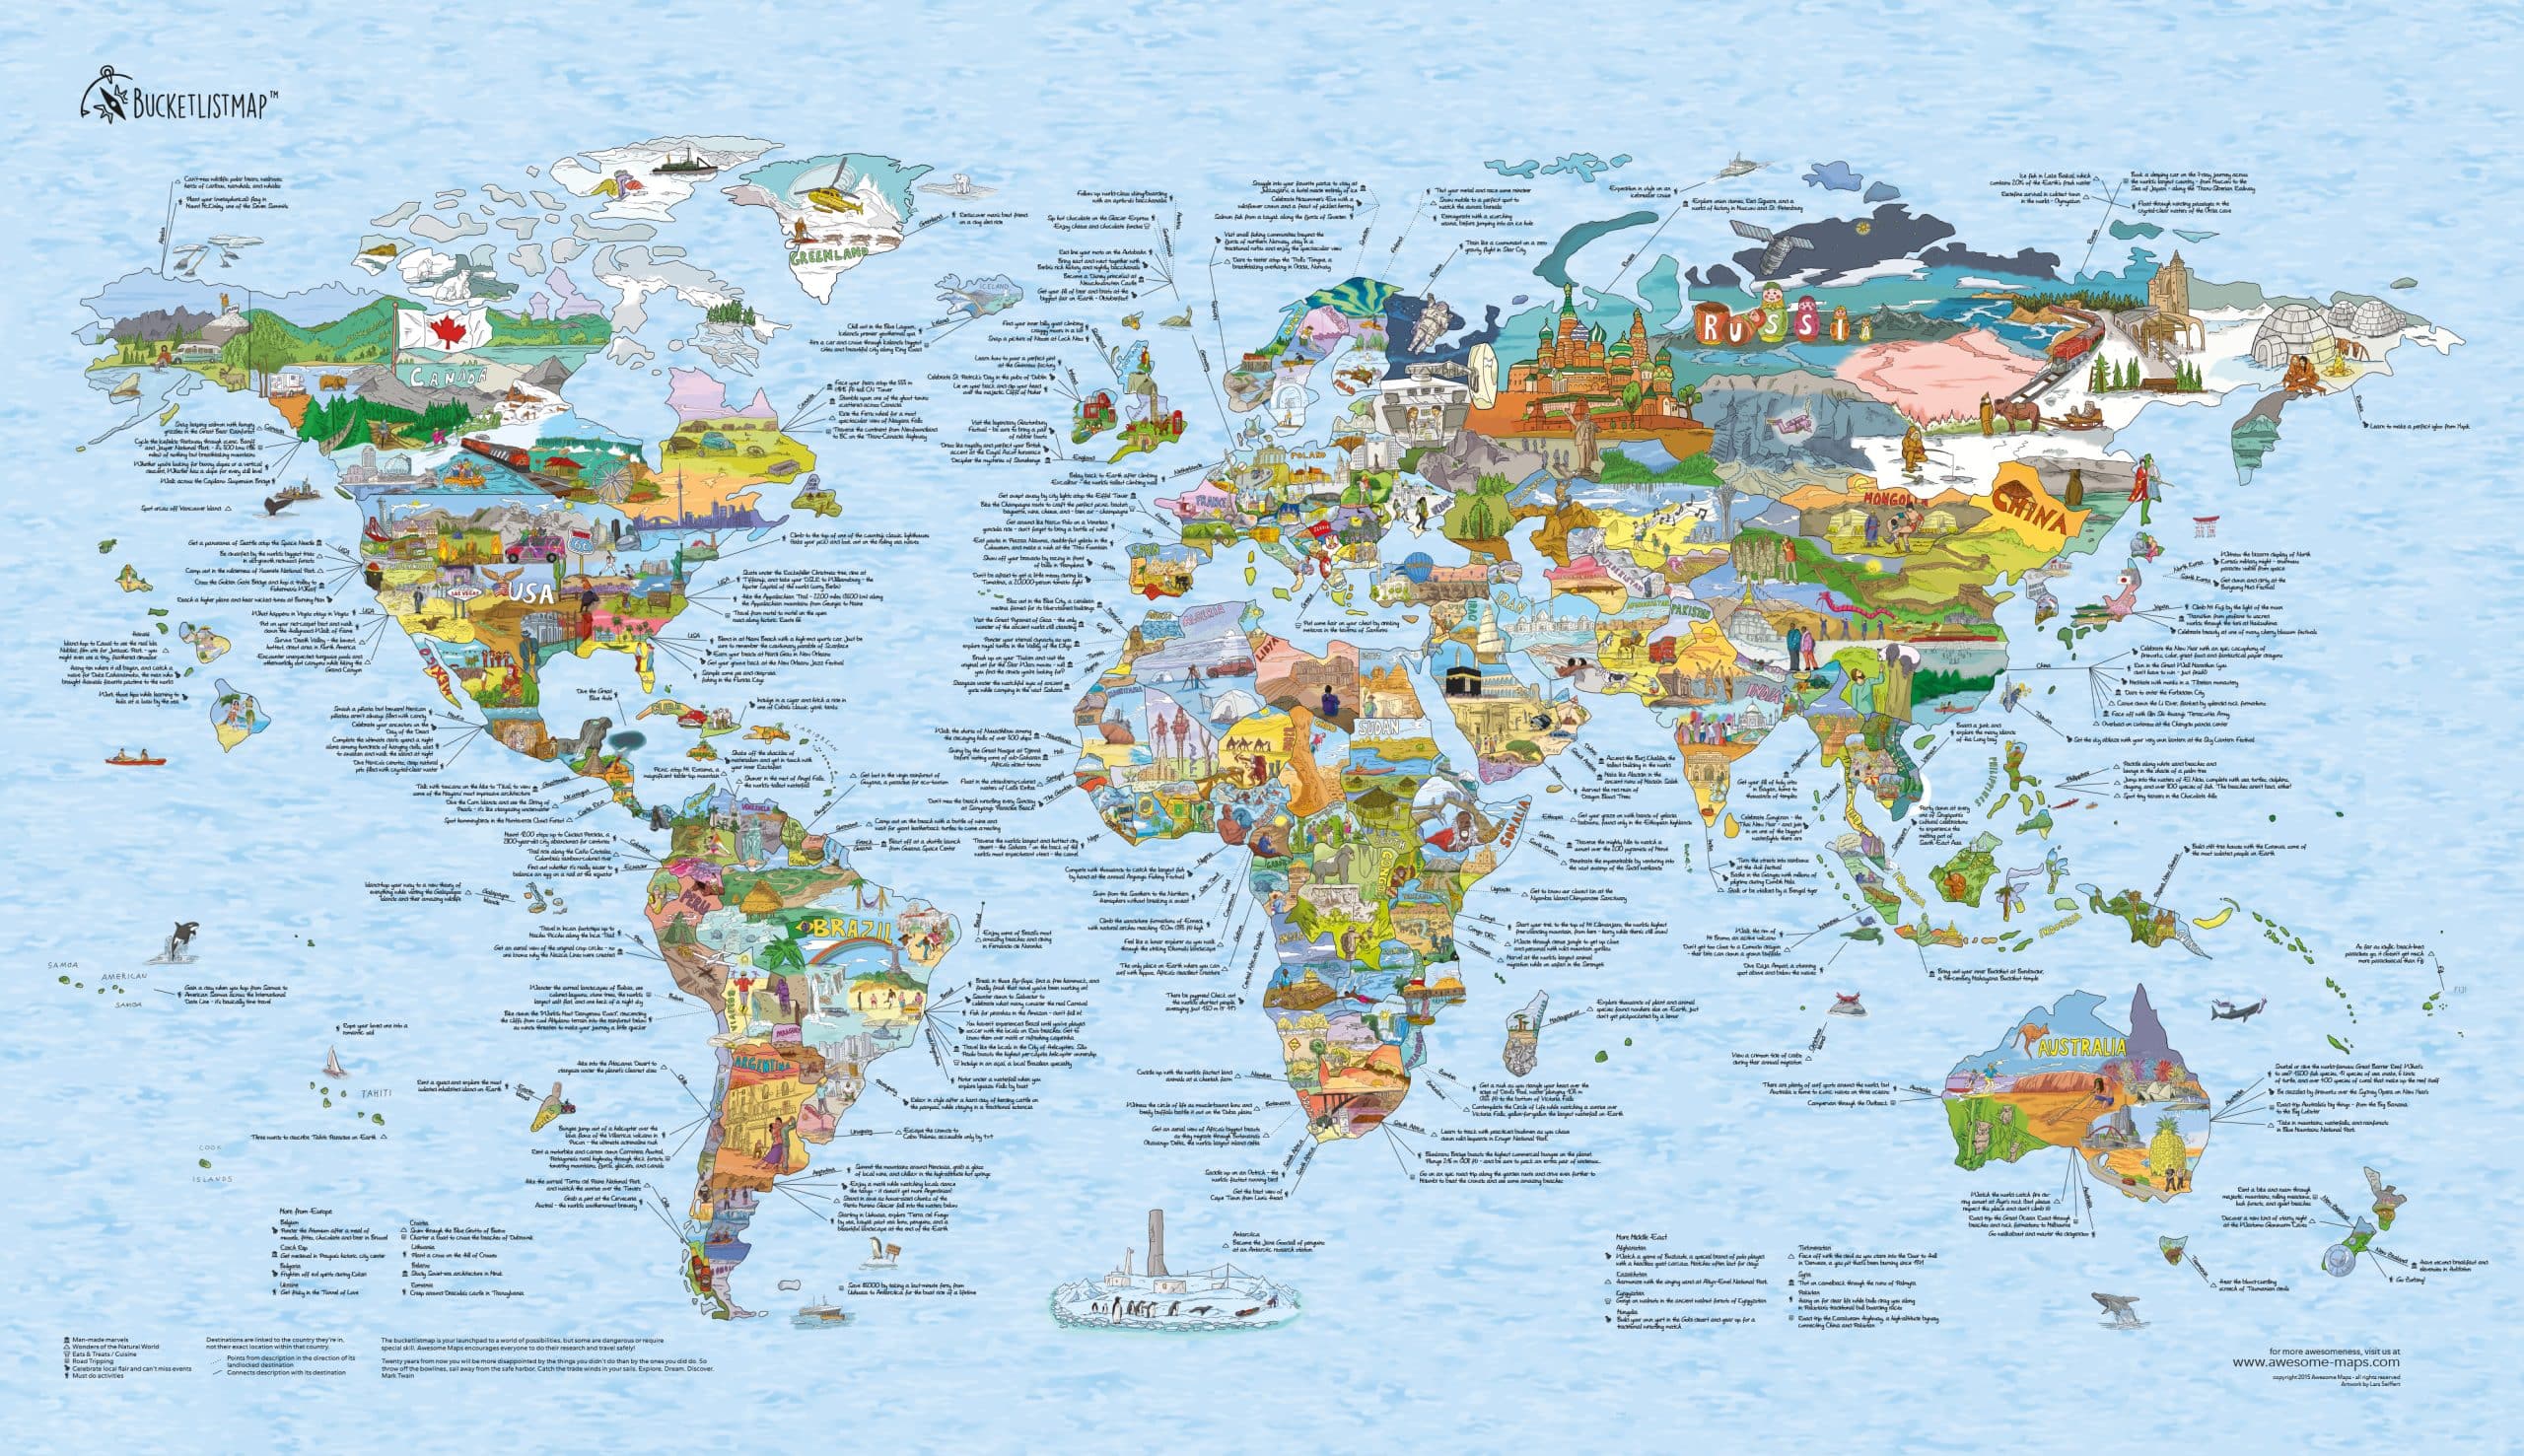 World map from the World Travelers Webshop